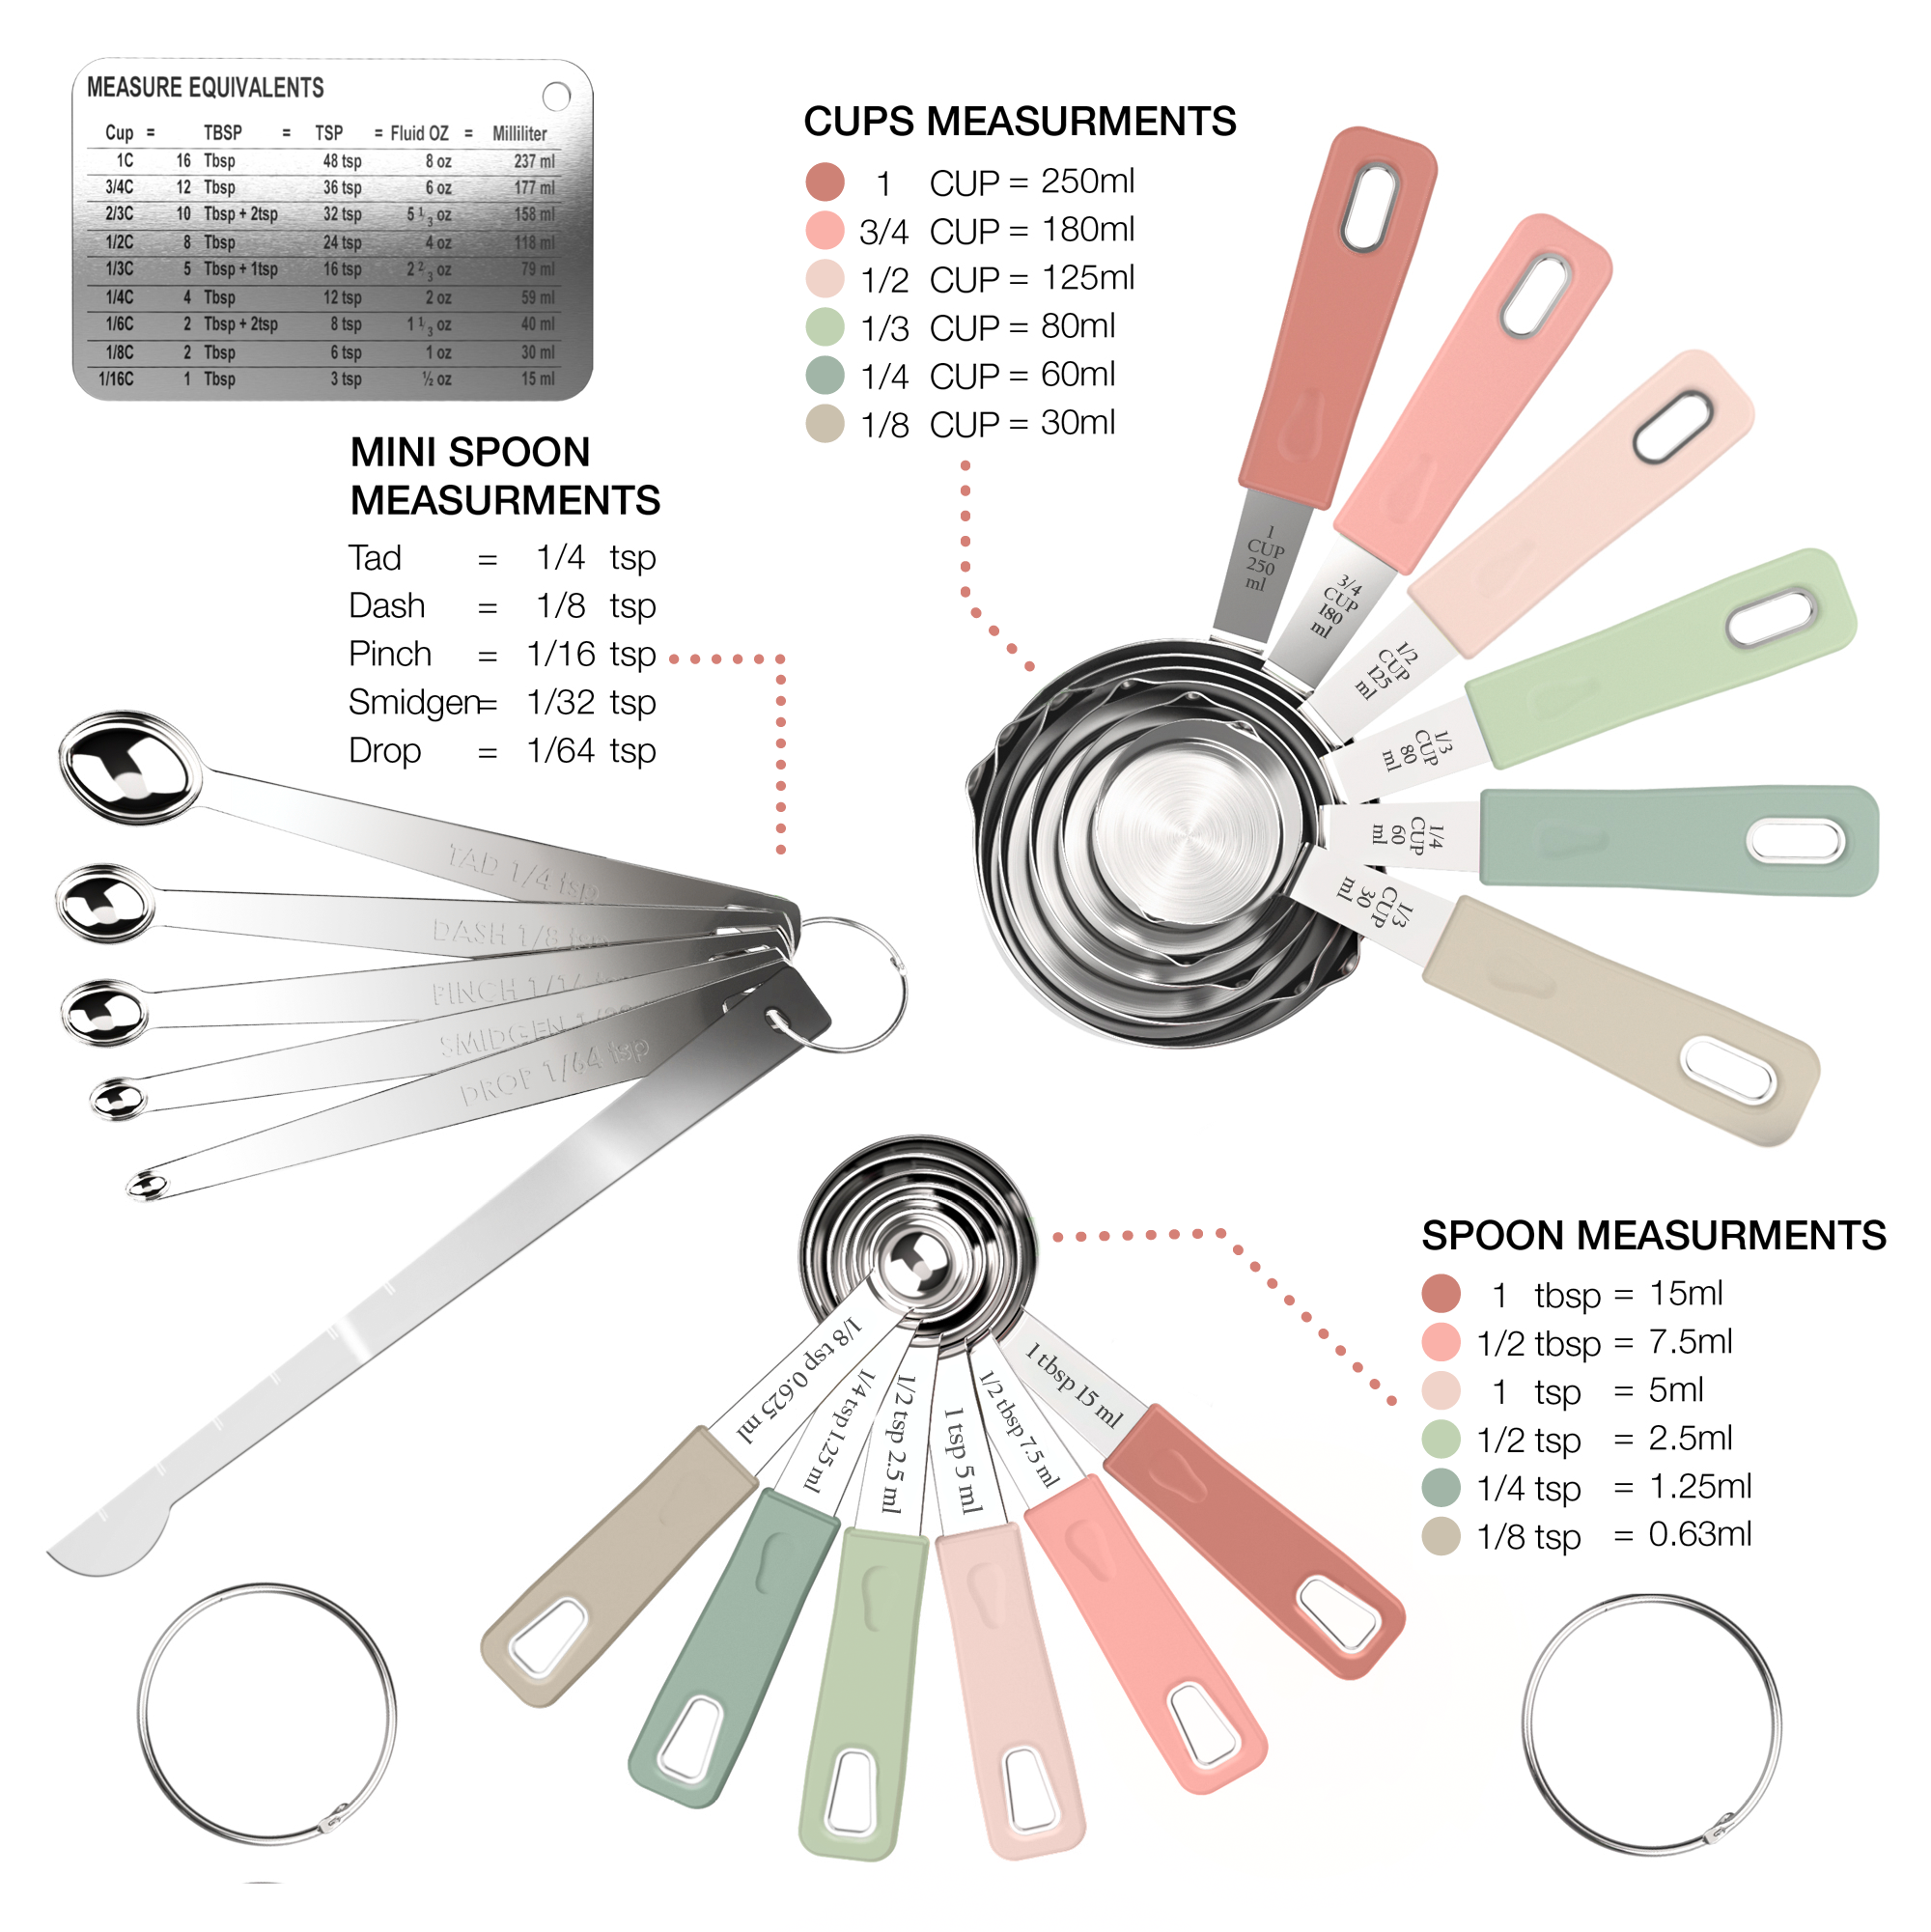 Measuring Cups and Measuring Spoons - Chowdown Lowdown